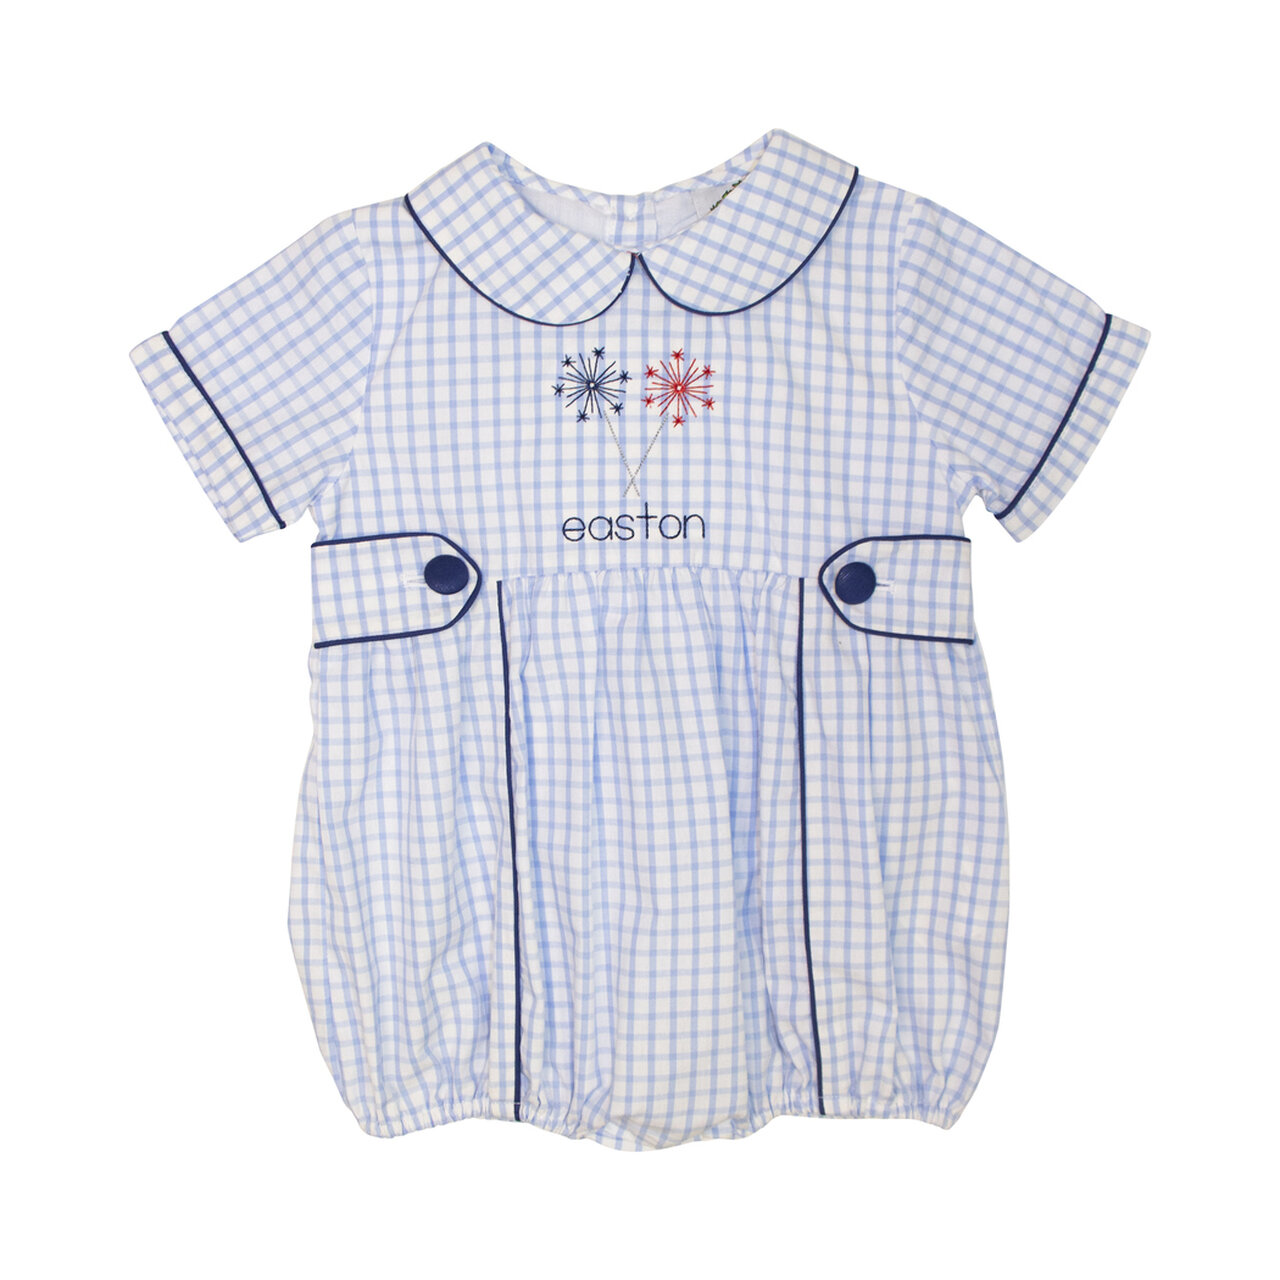 Pineapples and Peonies - Patriotic Children's Clothing